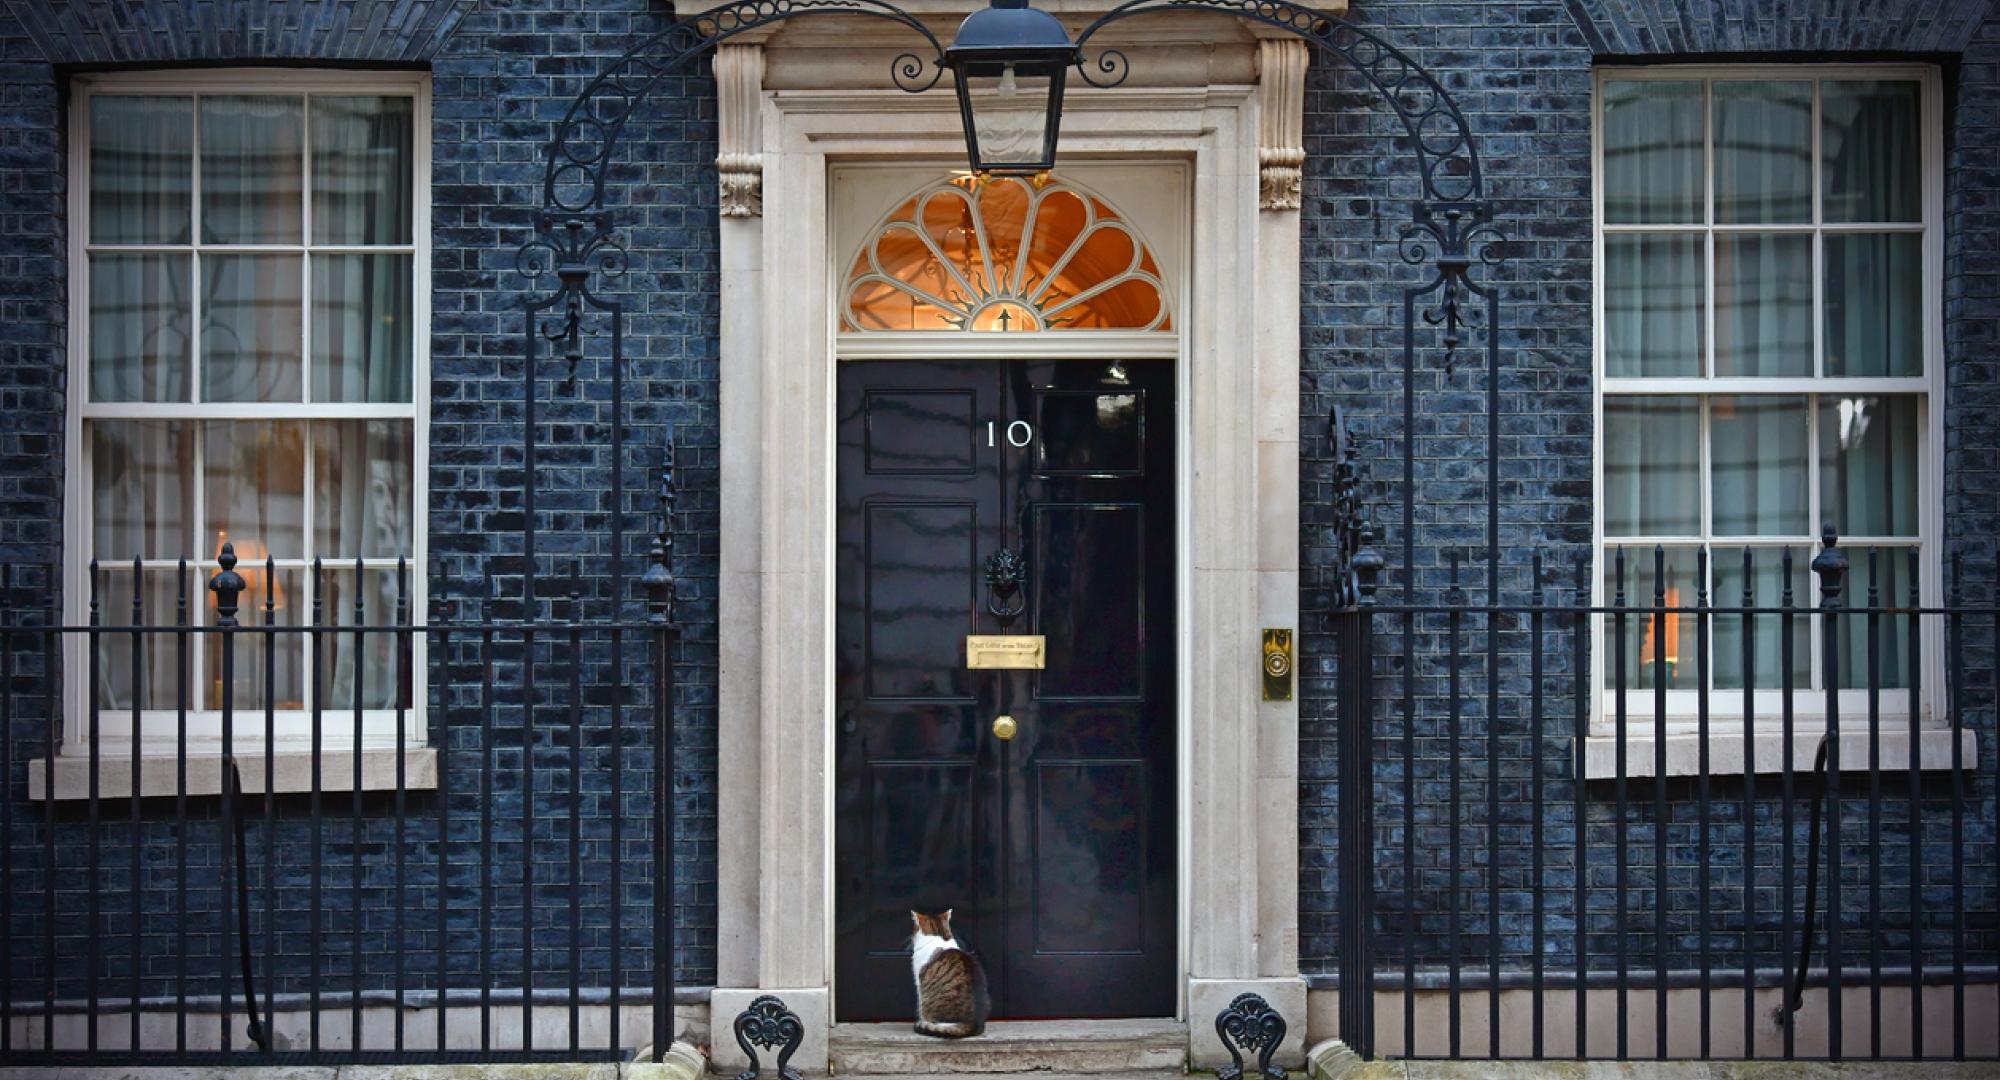 Resident cat sits in Downing Street outside number 10 - the official office and residence of the British Prime Minister in London, UK